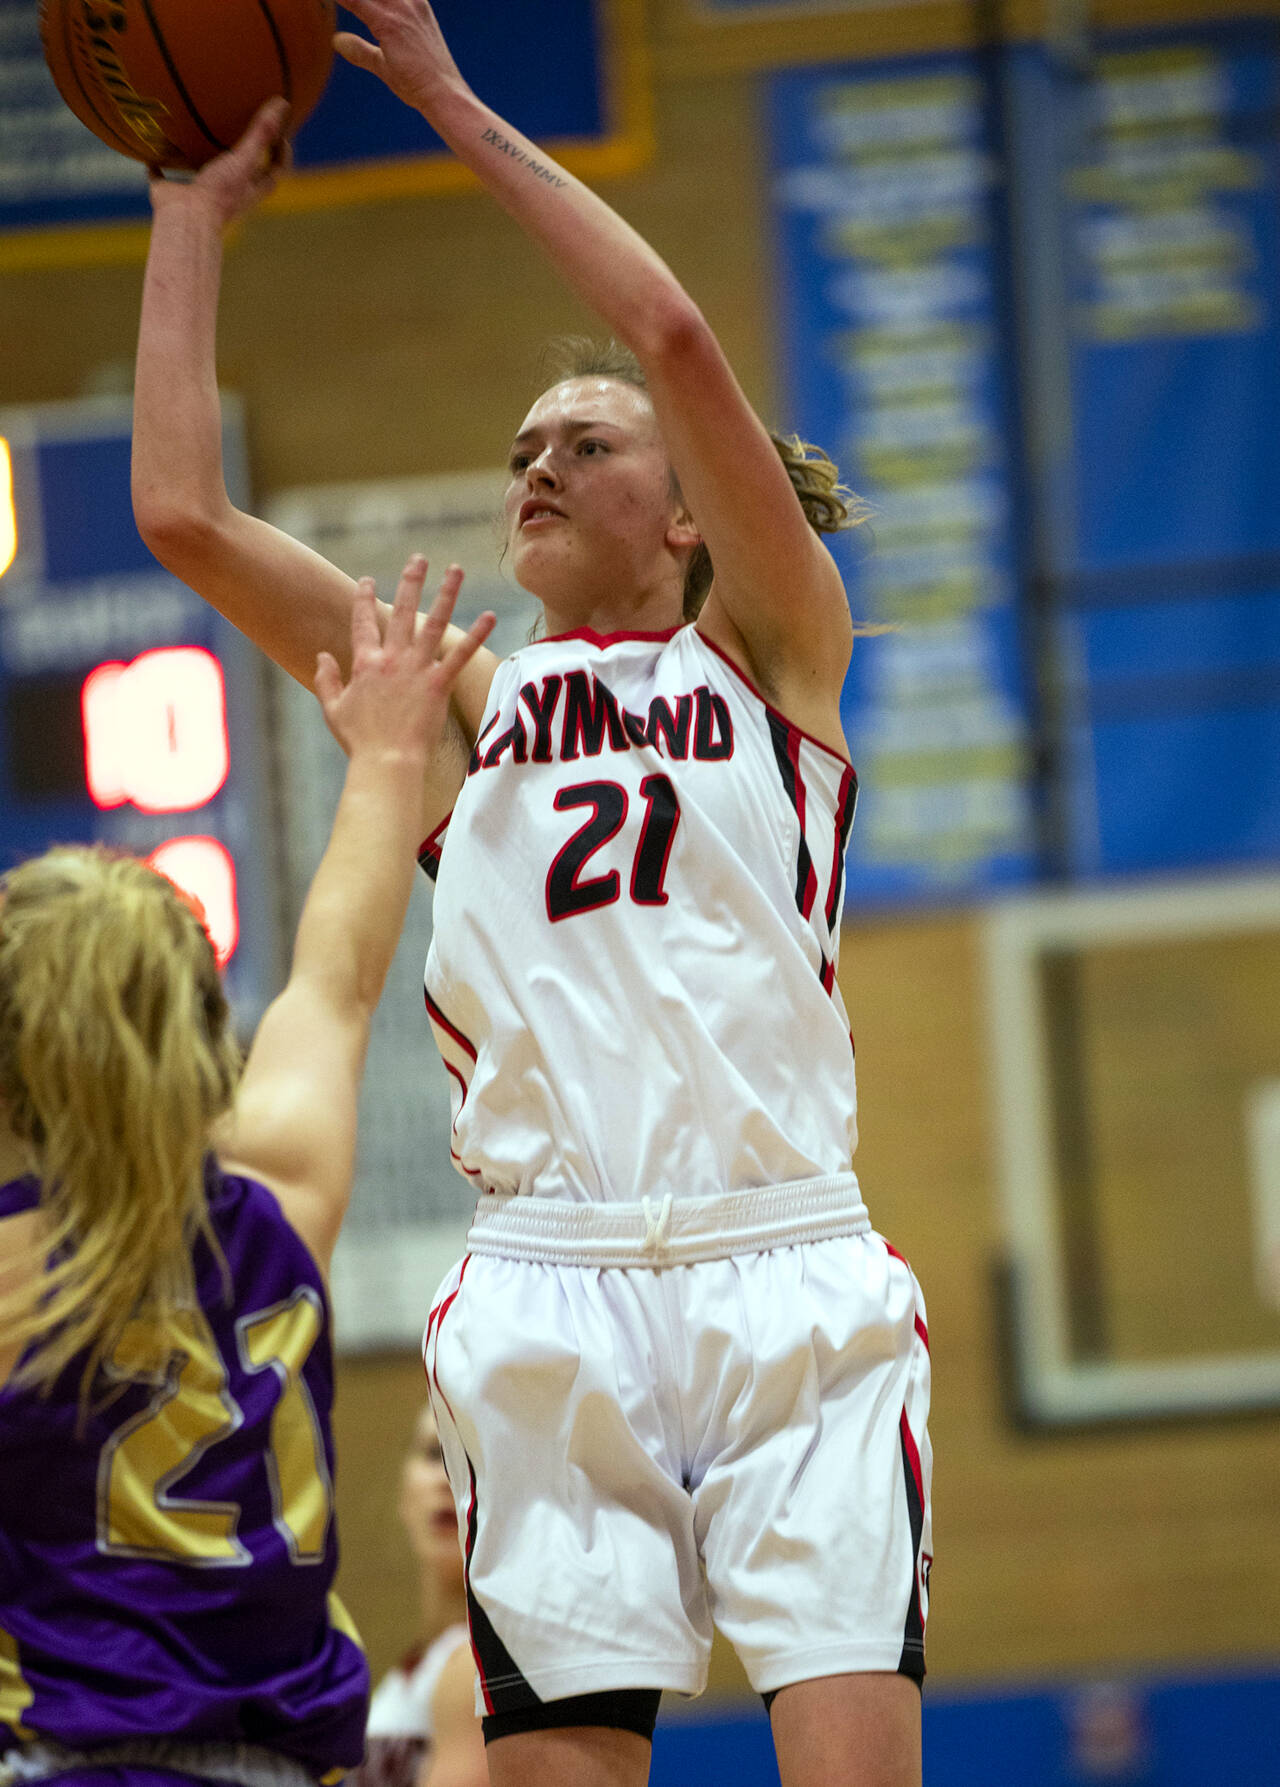 PHOTO BY KEVIN MILLER Raymond senior guard Kyra Gardner (21) scored 24 points as Raymond advanced to the 2B District 4 title game with a 51-45 win over Onalaska on Tuesday in Kelso. It’s the first time Raymond has reached the district title game since 1991.